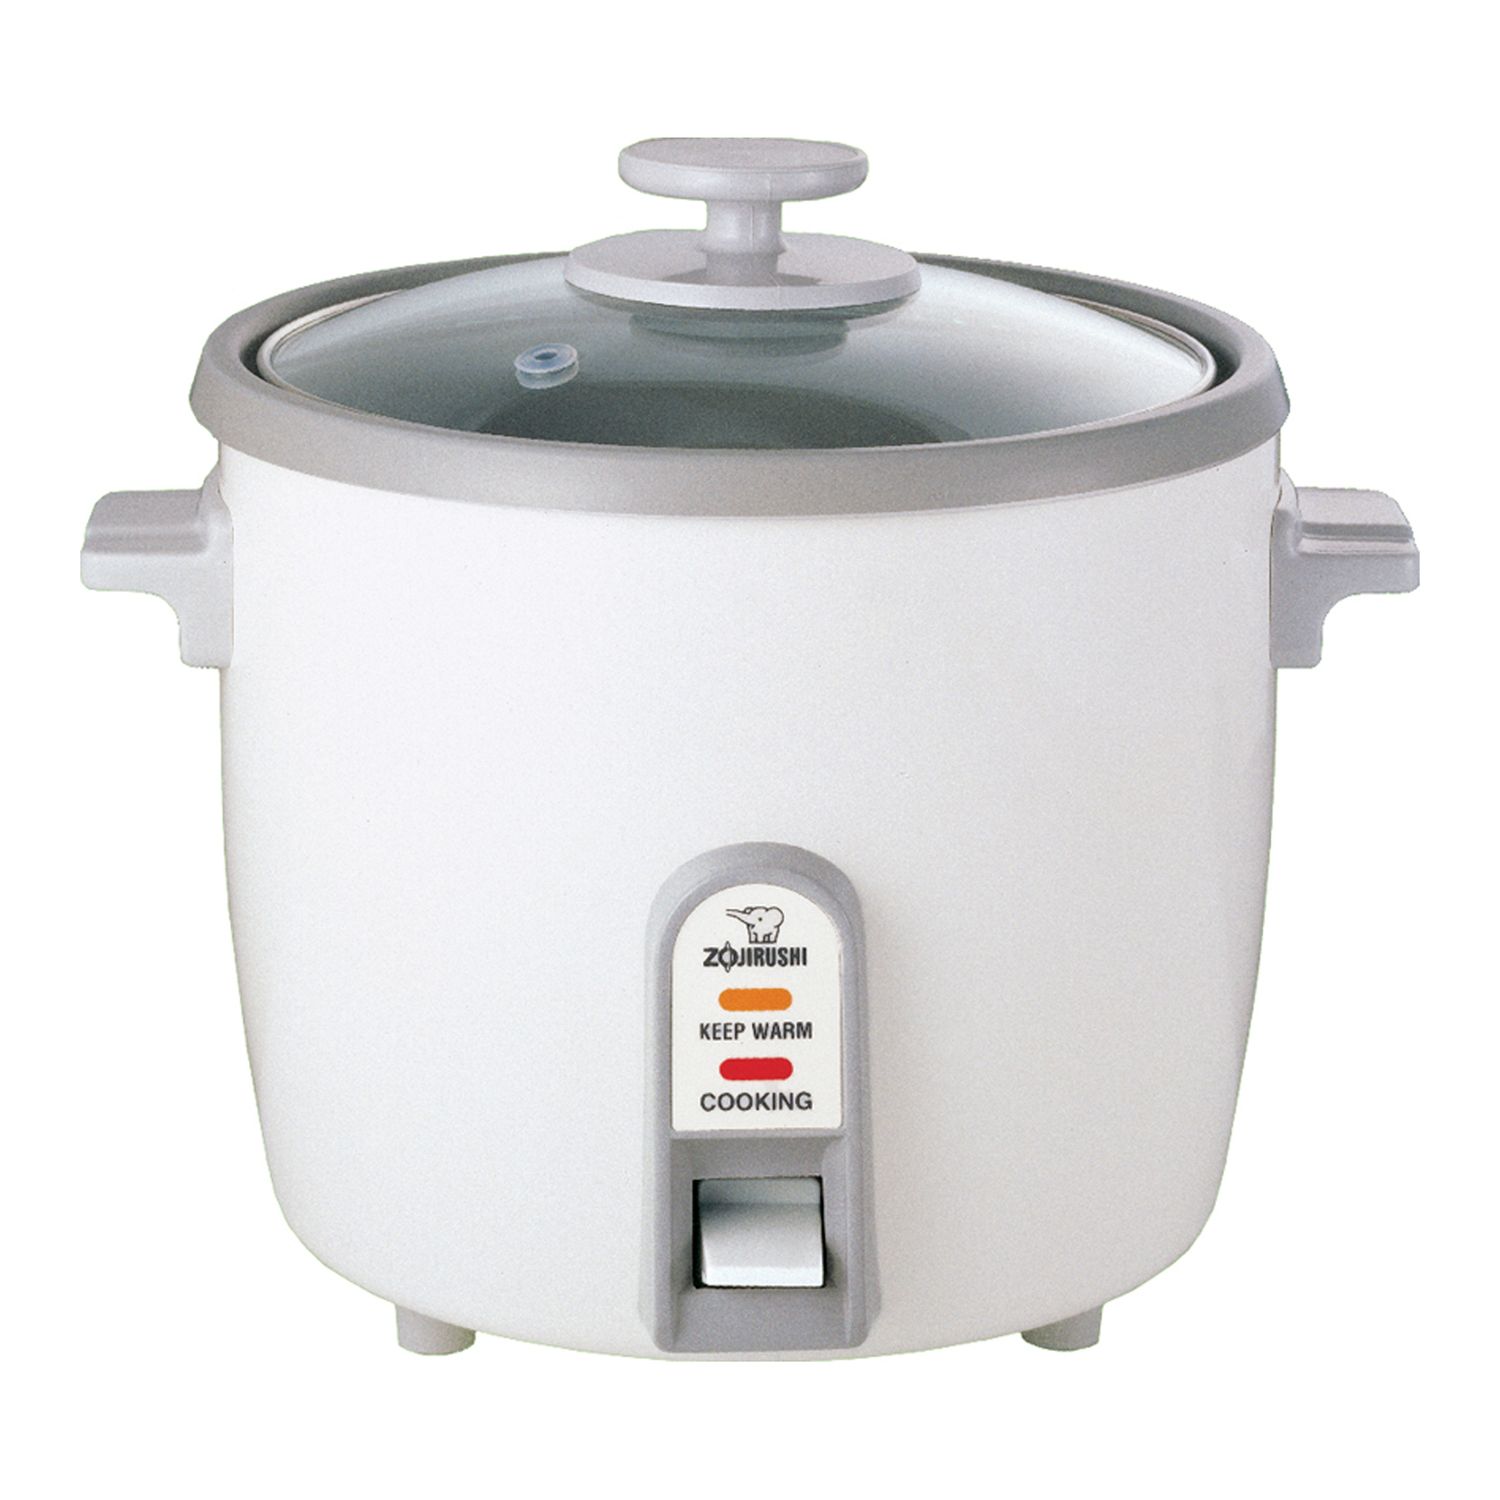 Better Chef 8 Cup Automatic Rice Cooker White - Office Depot